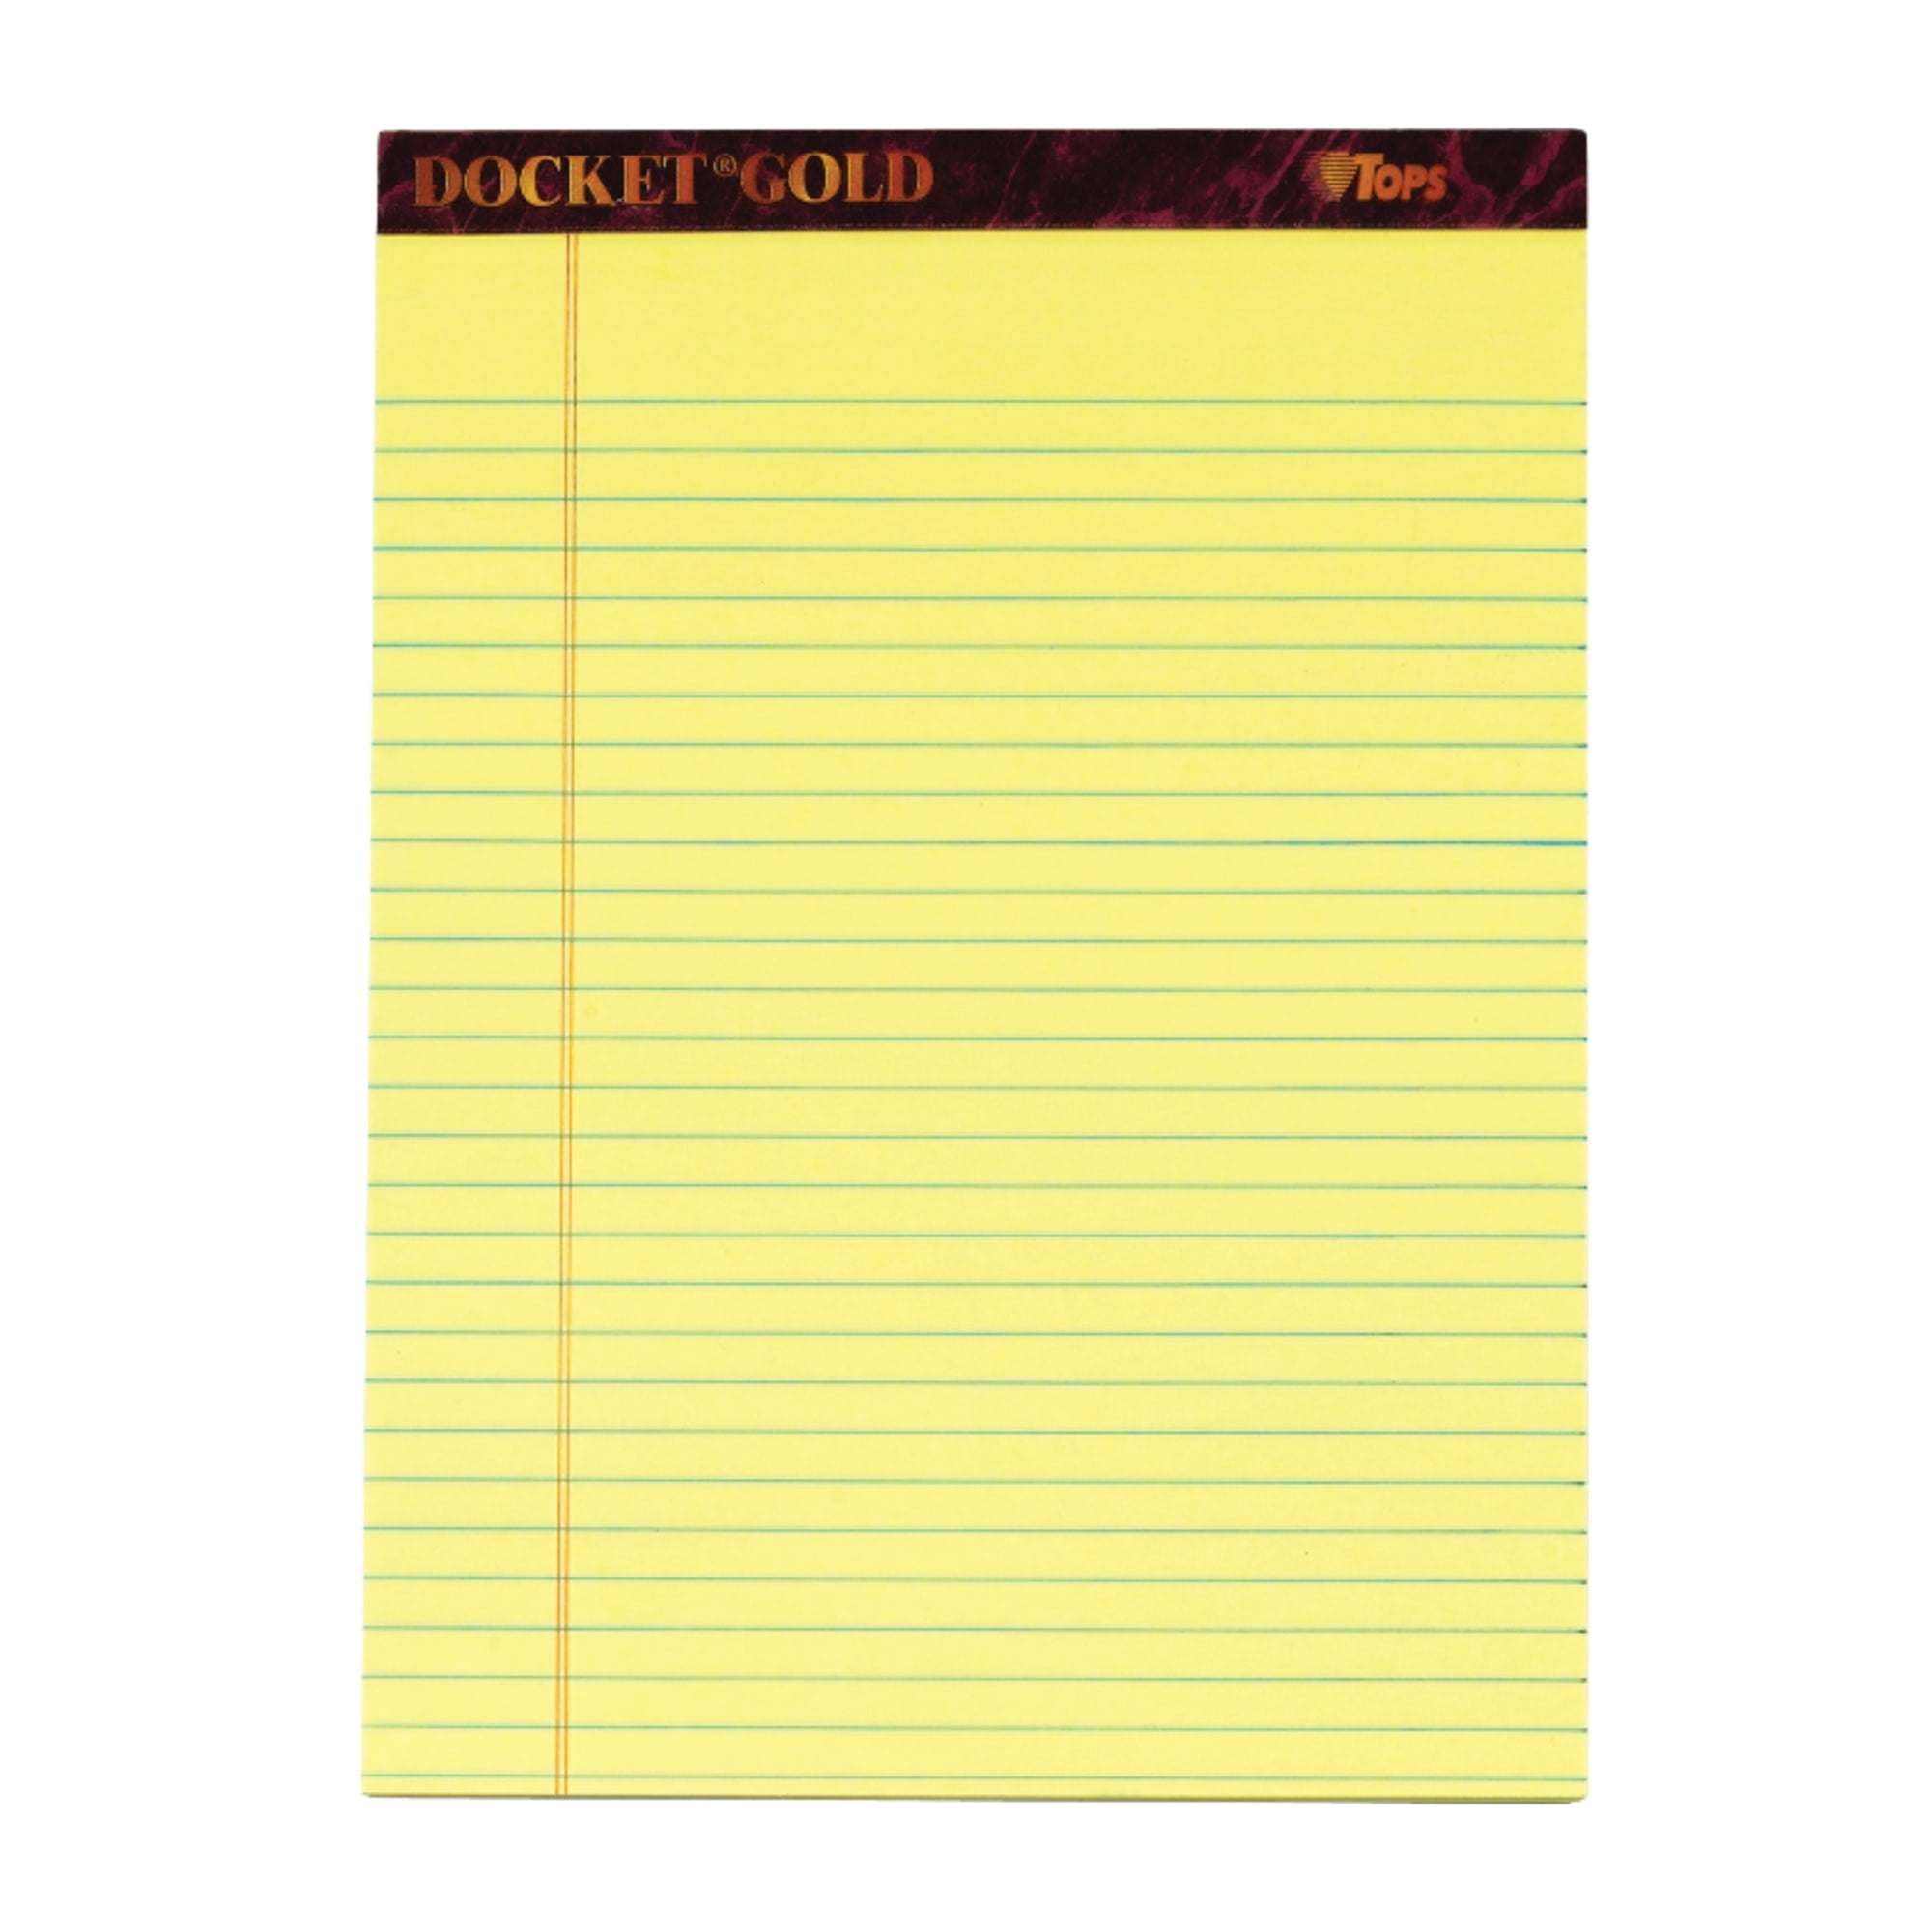 Canary Paper Narrow Rule 63376 100 Sheets 2X The Sheets of Standard Pads TOPS Docket Gold Writing Pads 6 Pack Perforated 8-1/2 x 11-3/4 